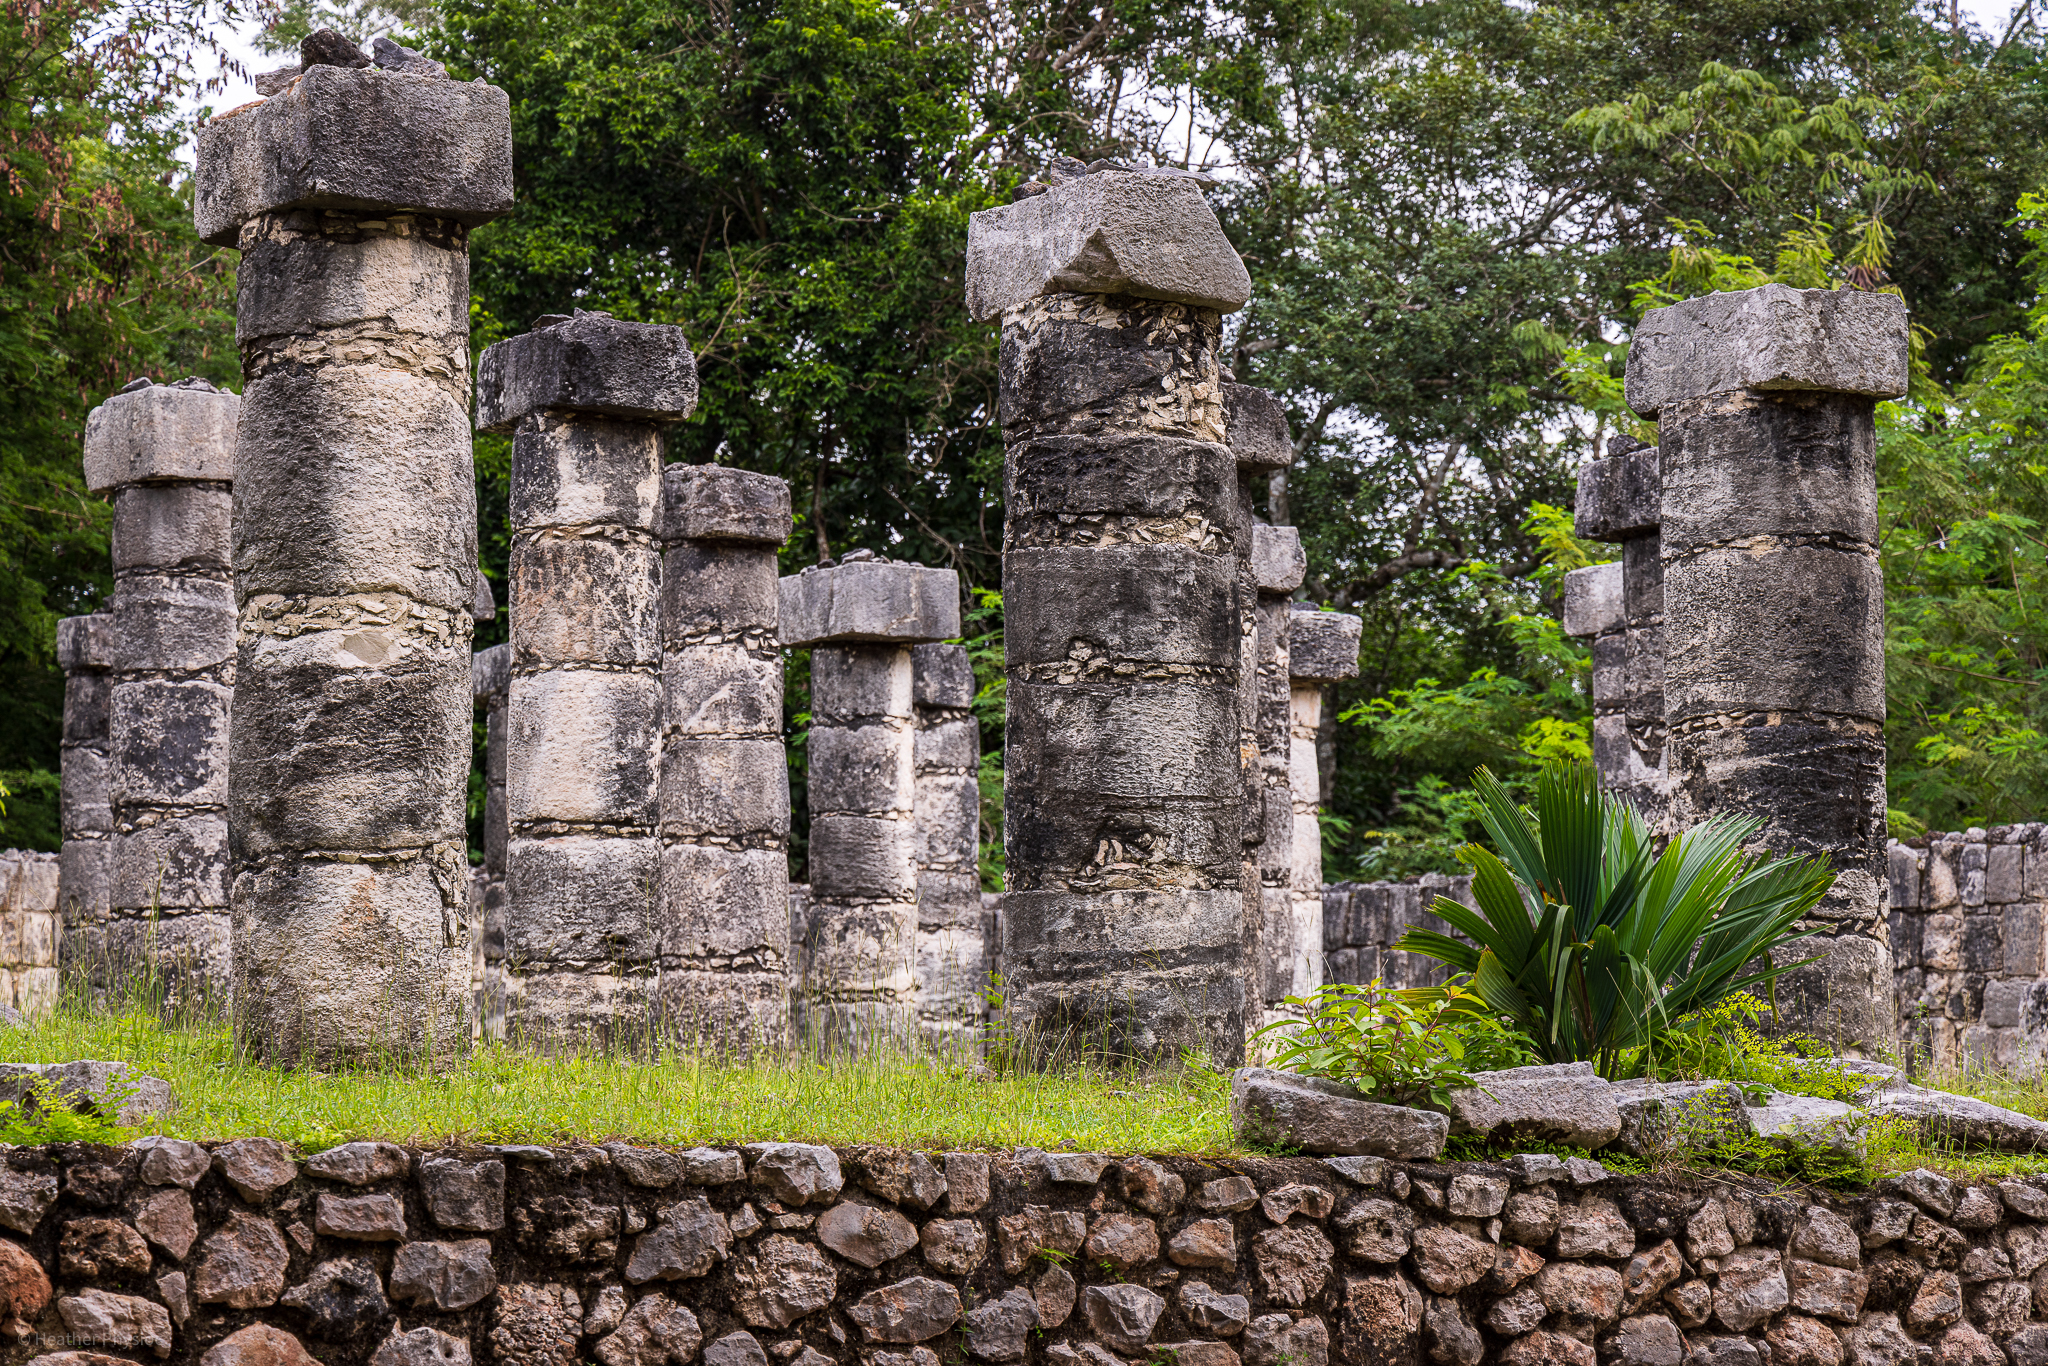 A series of ancient stone pillars, remnants of Mayan architecture, stand in a row at the ruins of Chichén Itzá, surrounded by lush jungle vegetation.